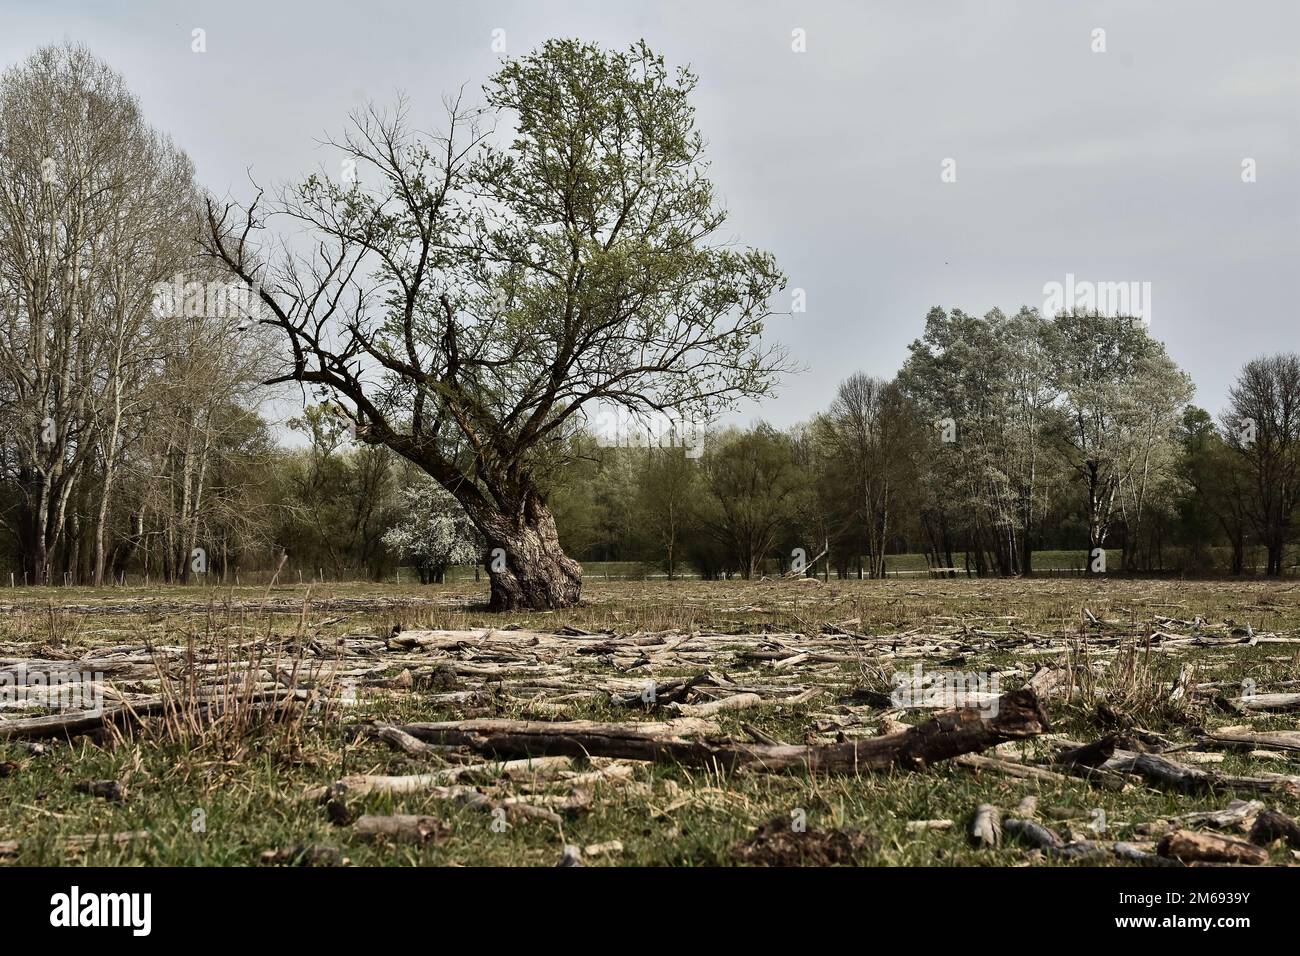 A tree in the middle of a field Stock Photo